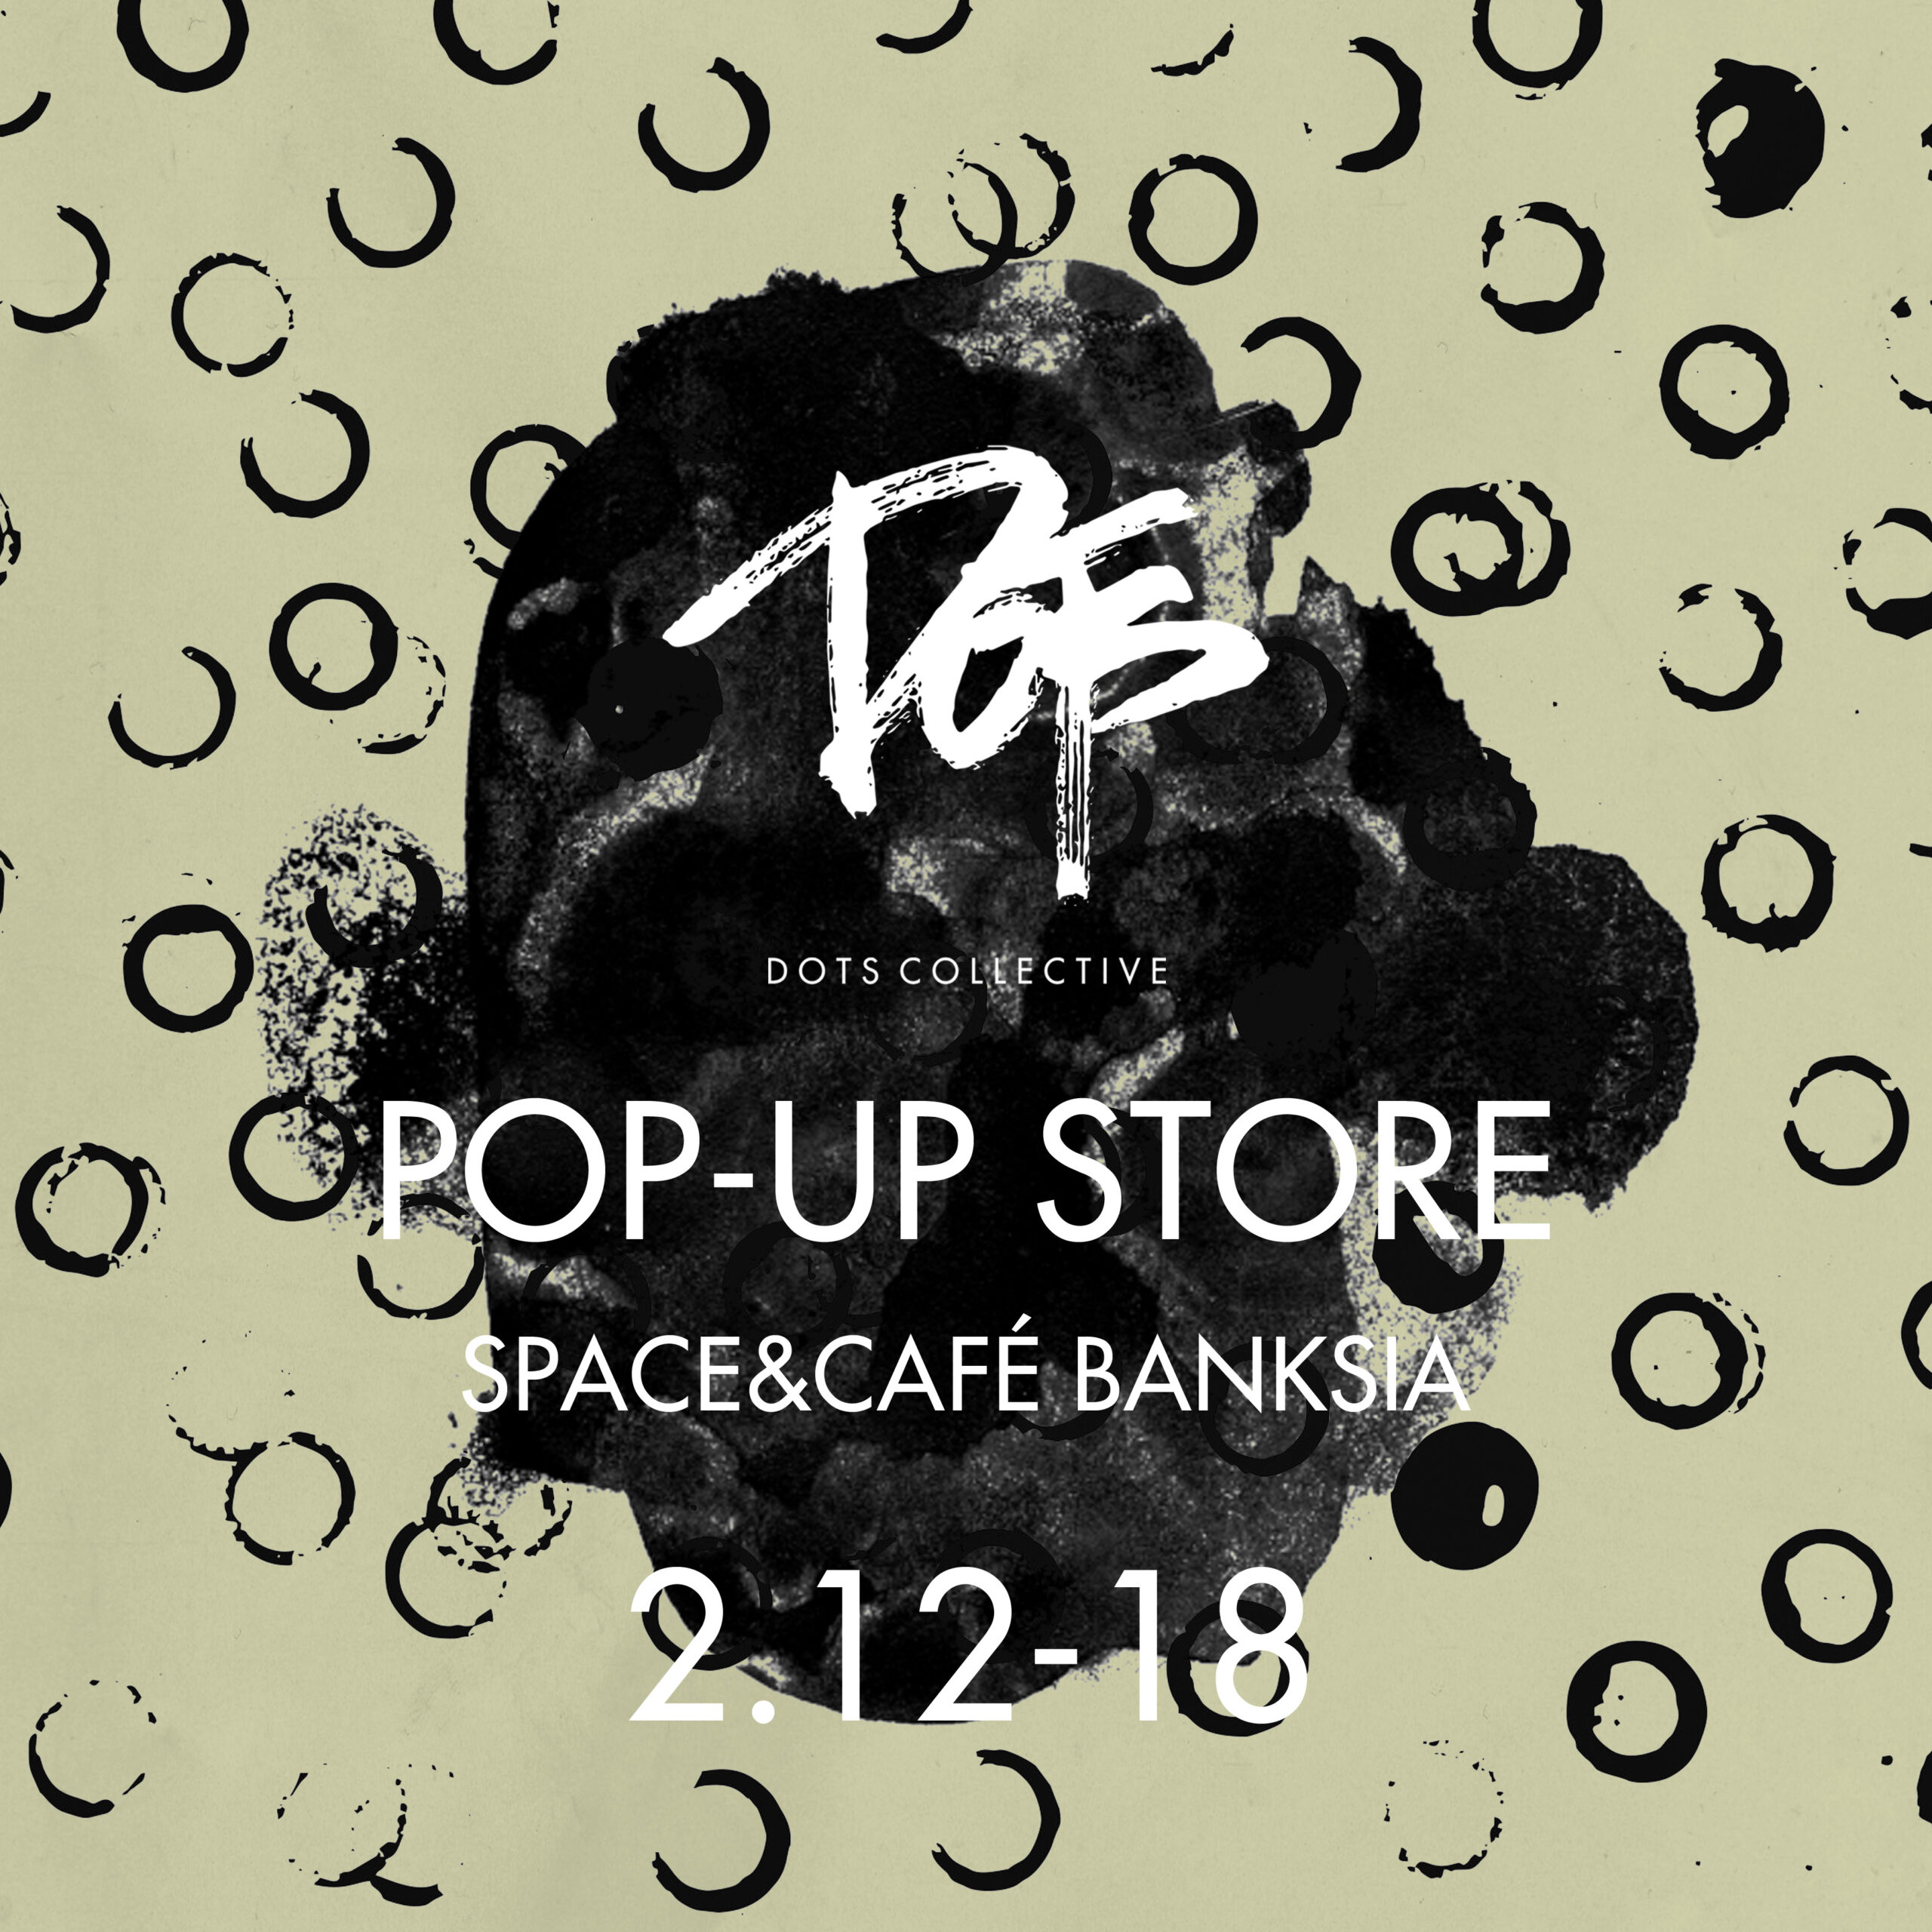 [DOTS COLLECTIVE] POP-UP STORE